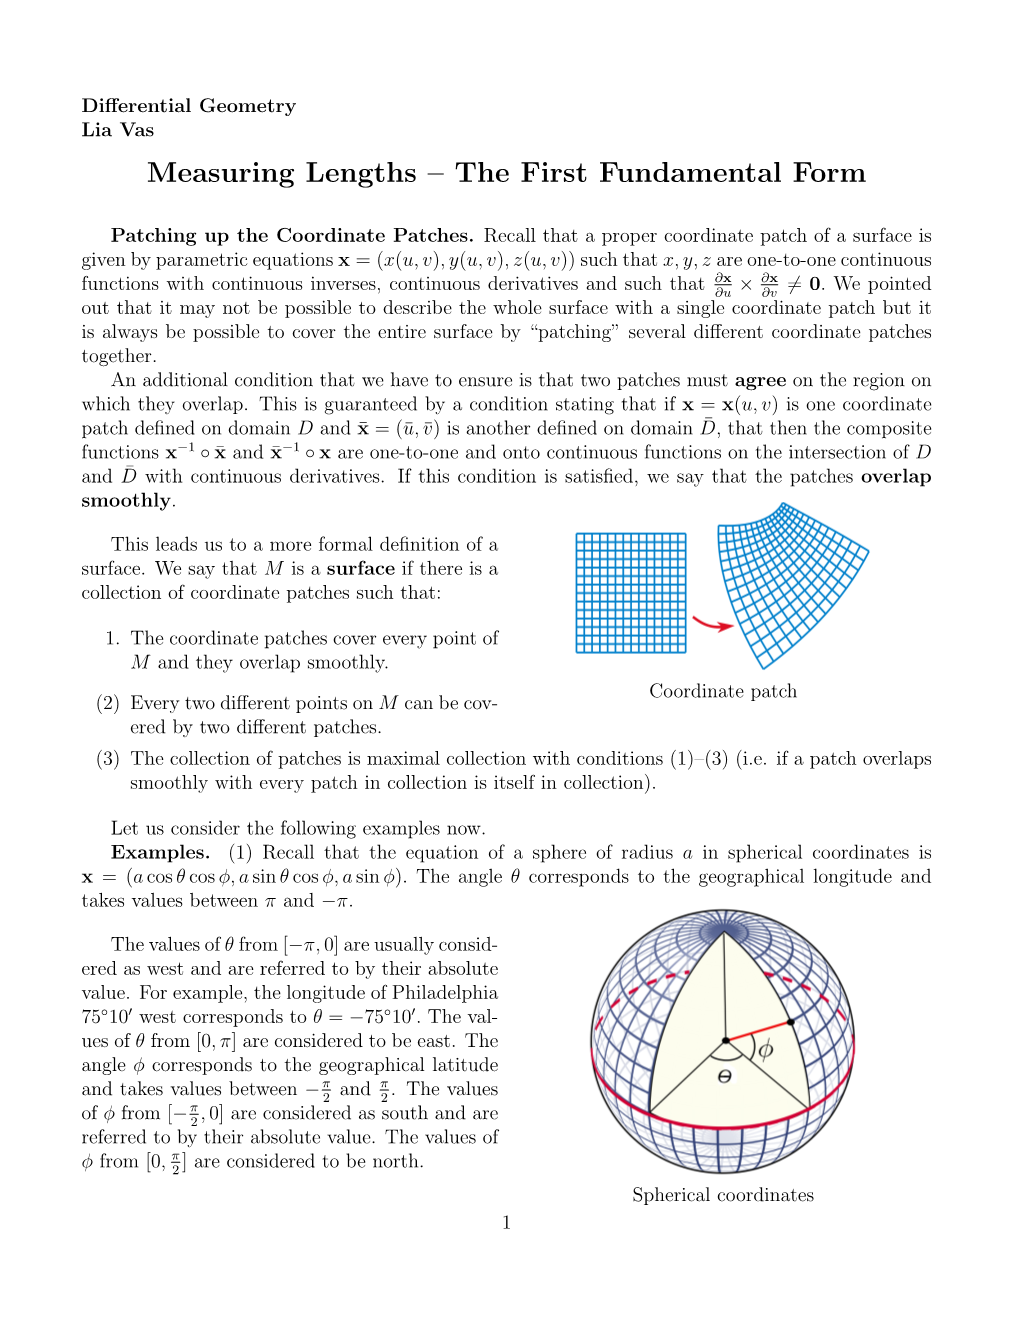 The First Fundamental Form